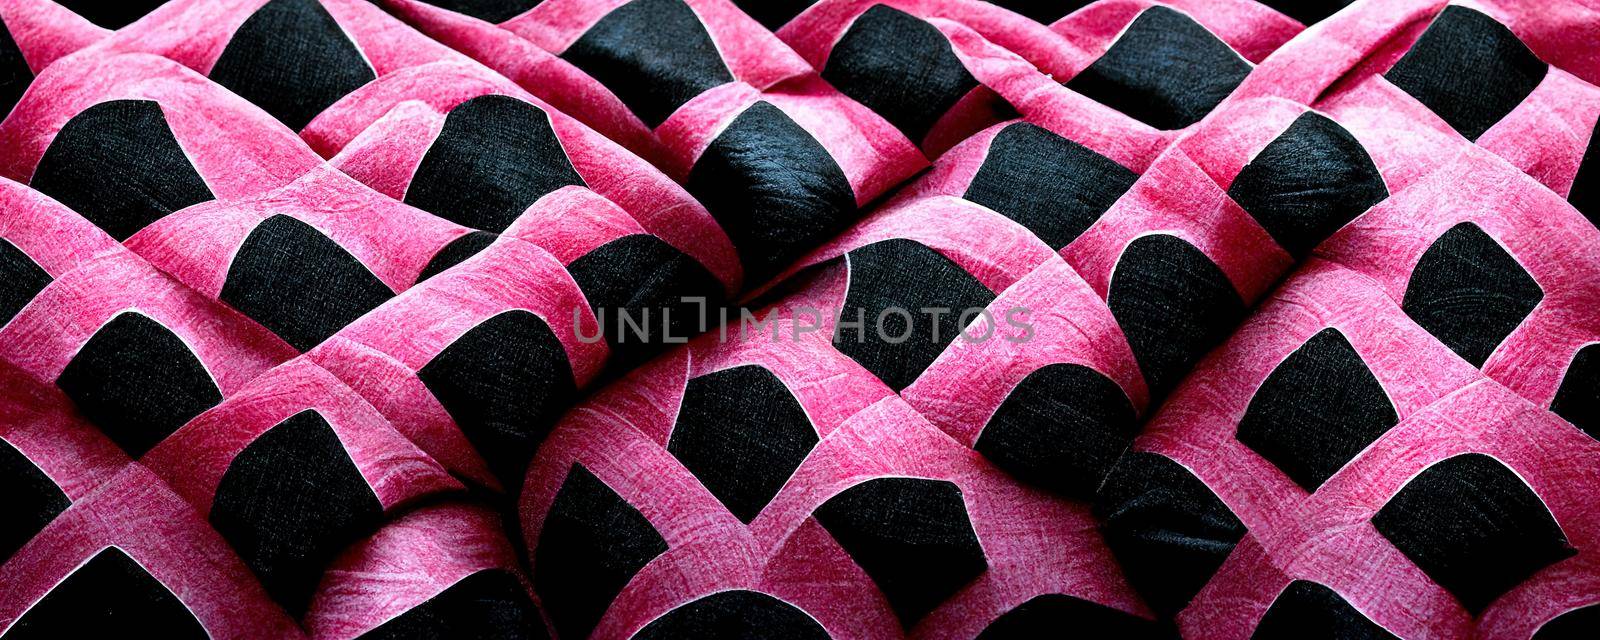 black and pink soft fabric, Colorful abstract wallpaper texture background illustration by TRMK